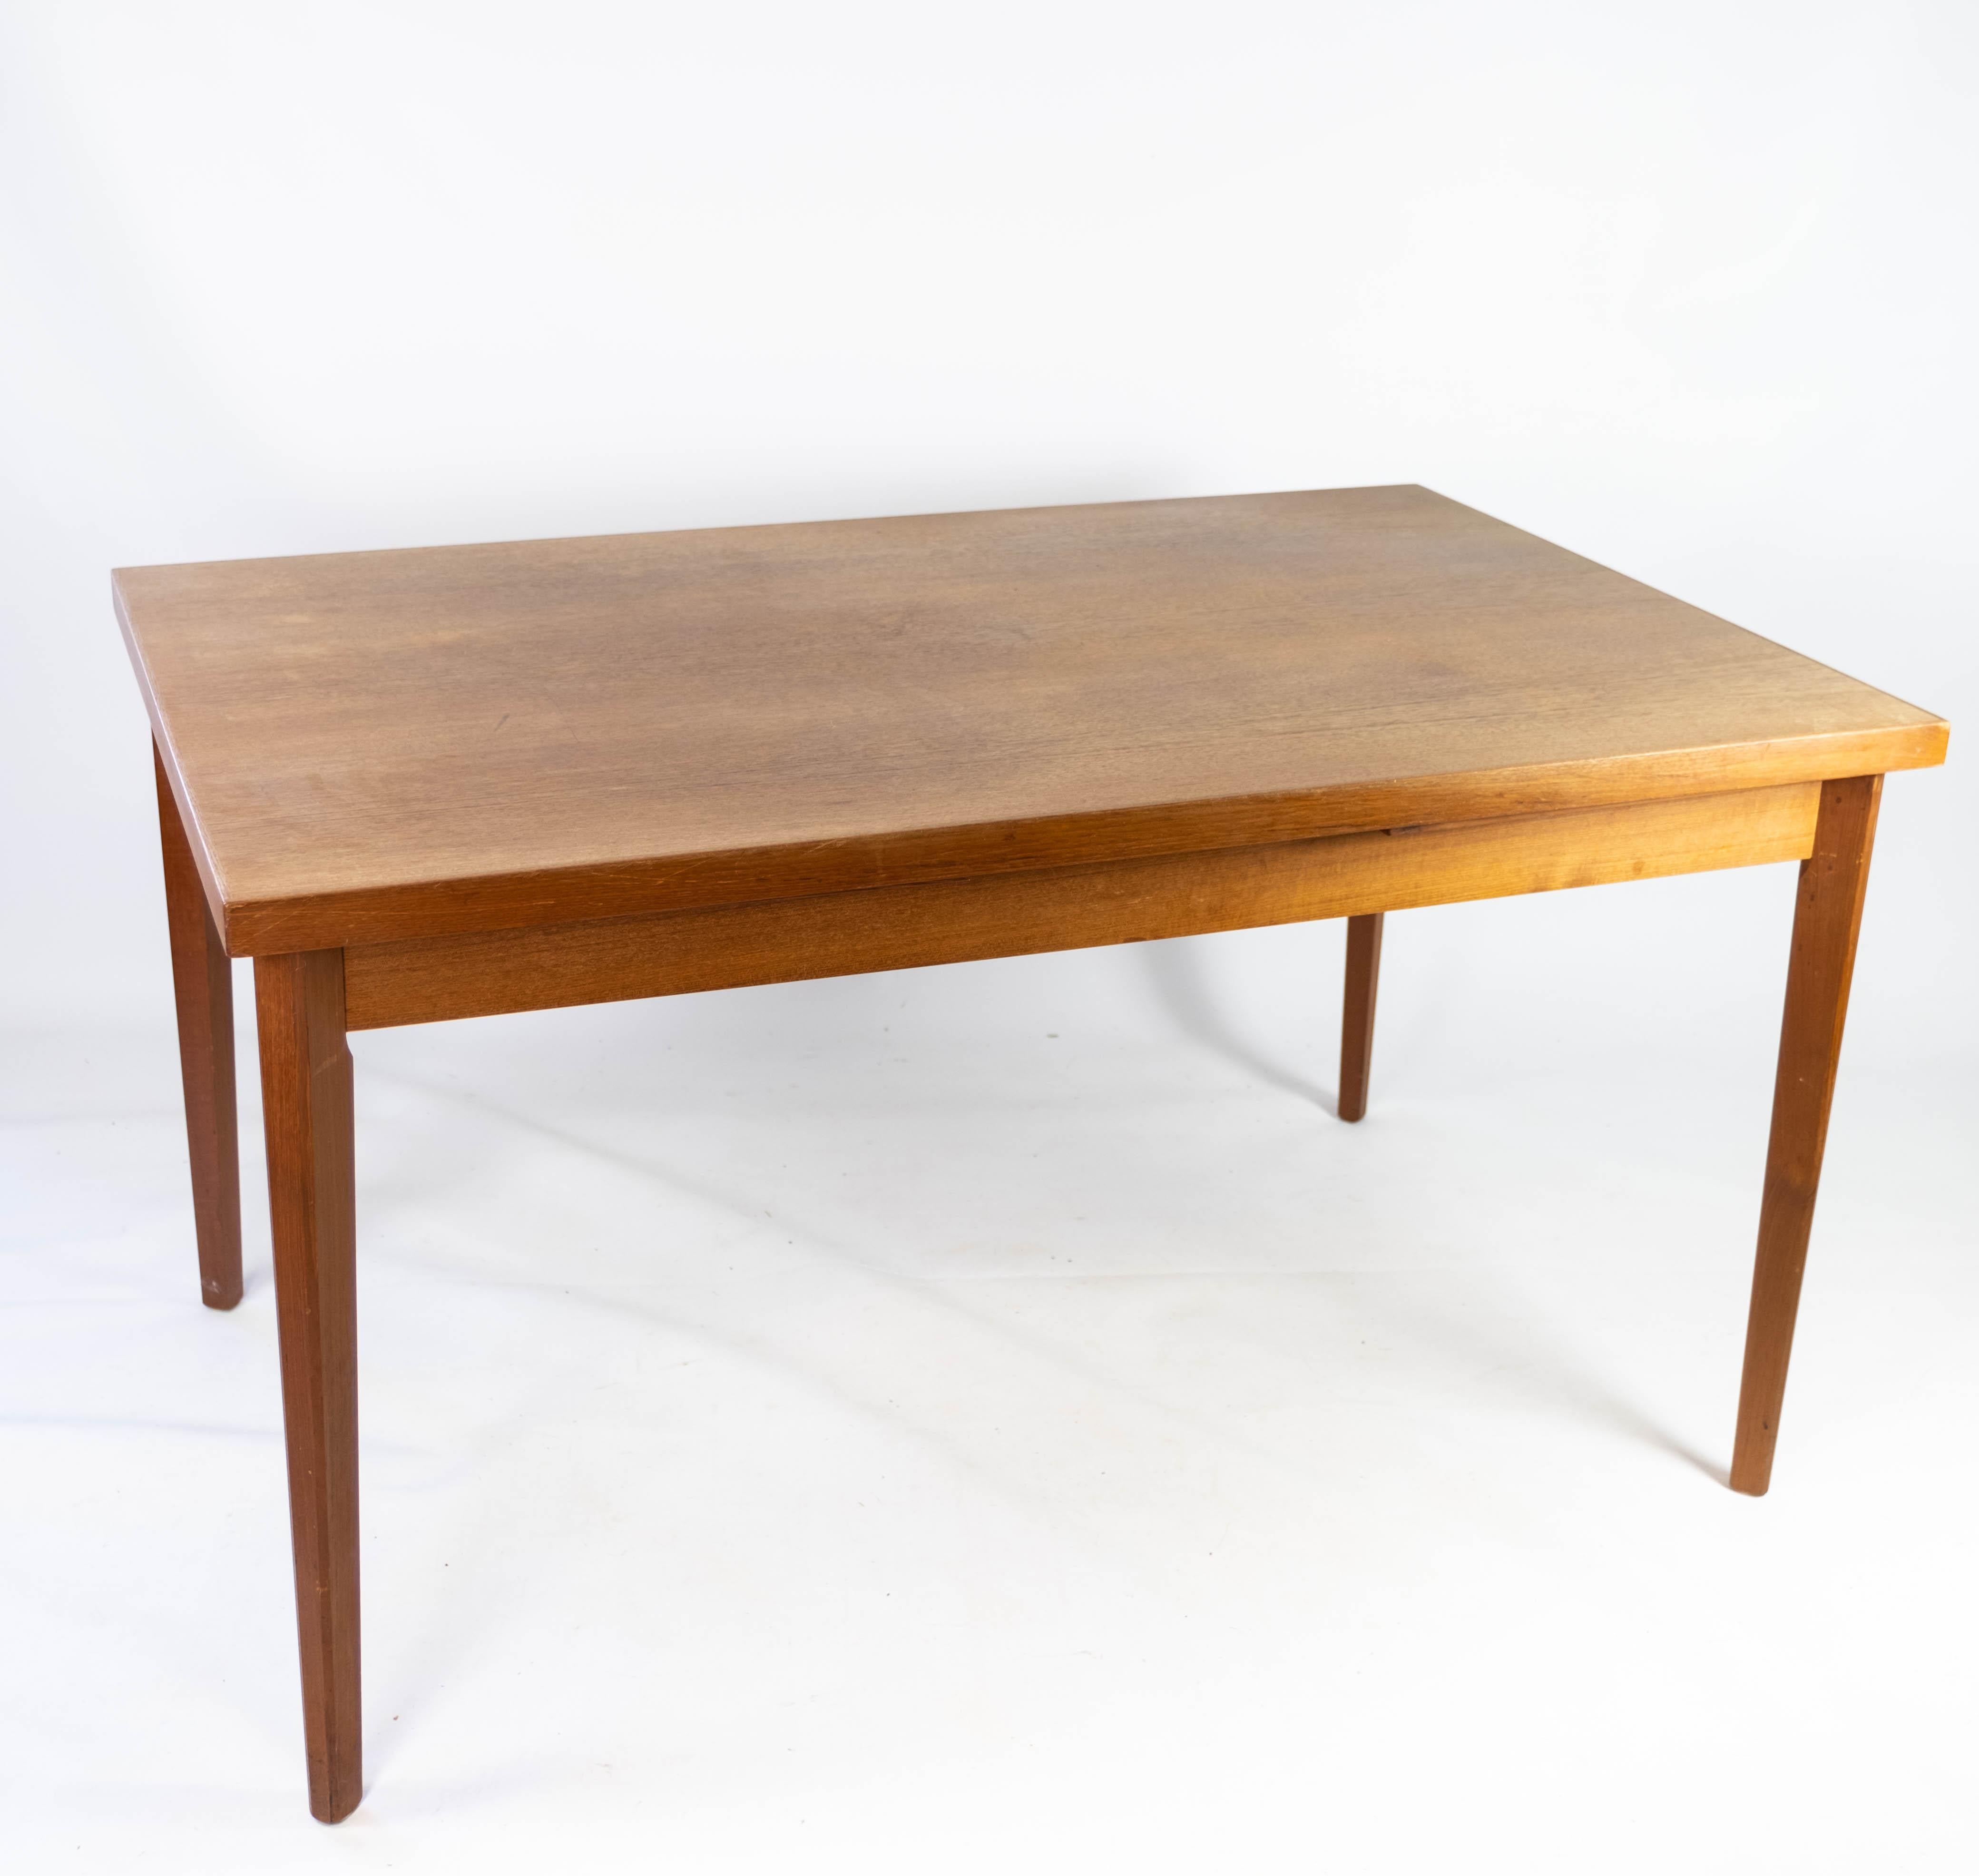 Dining Table with Extensions in Teak of Danish Design from the 1960s For Sale 1